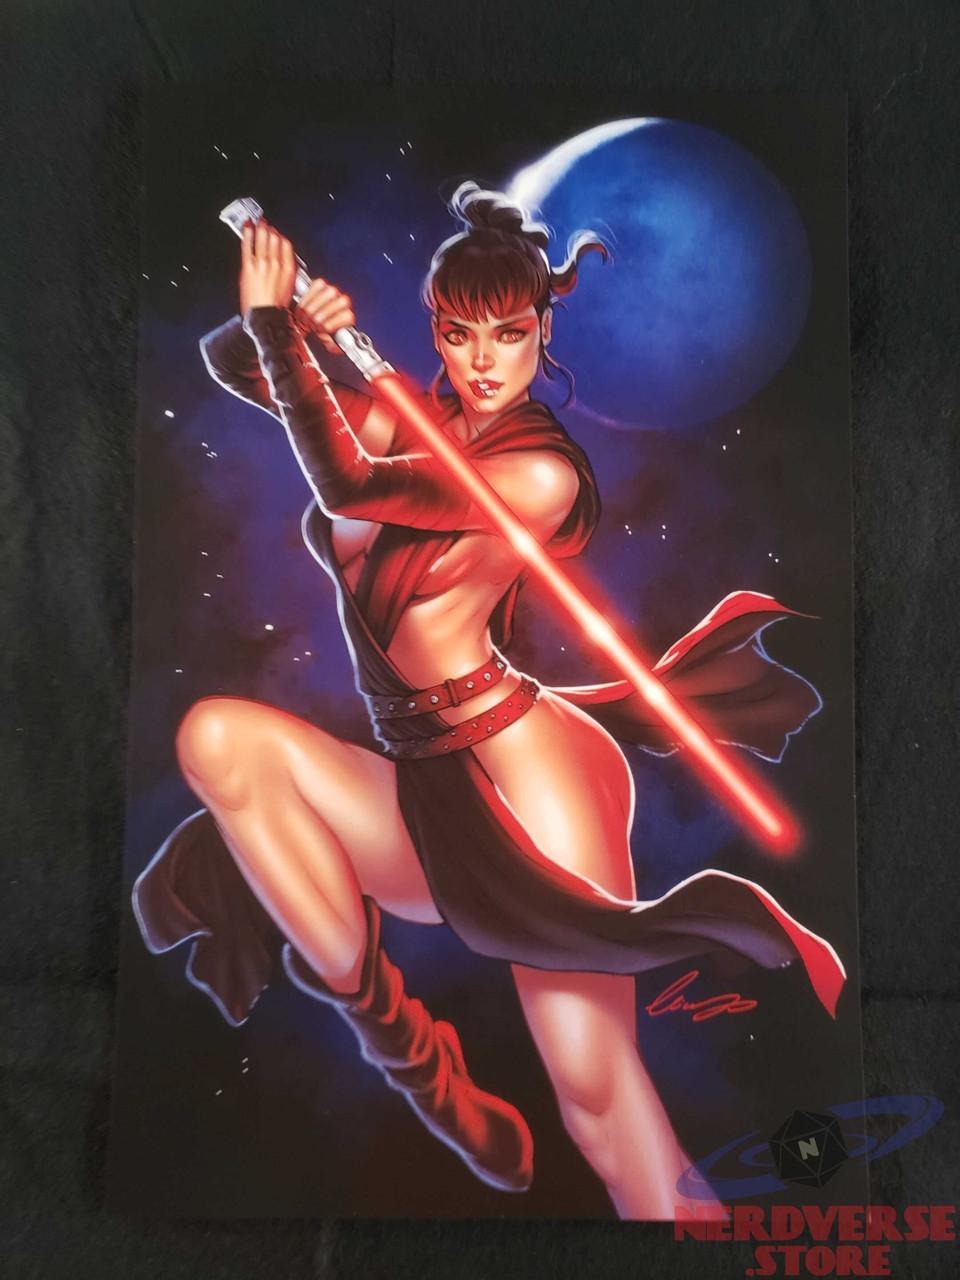 May the Dark Side Be With You 11x17 Print - Elias Chatzoudis